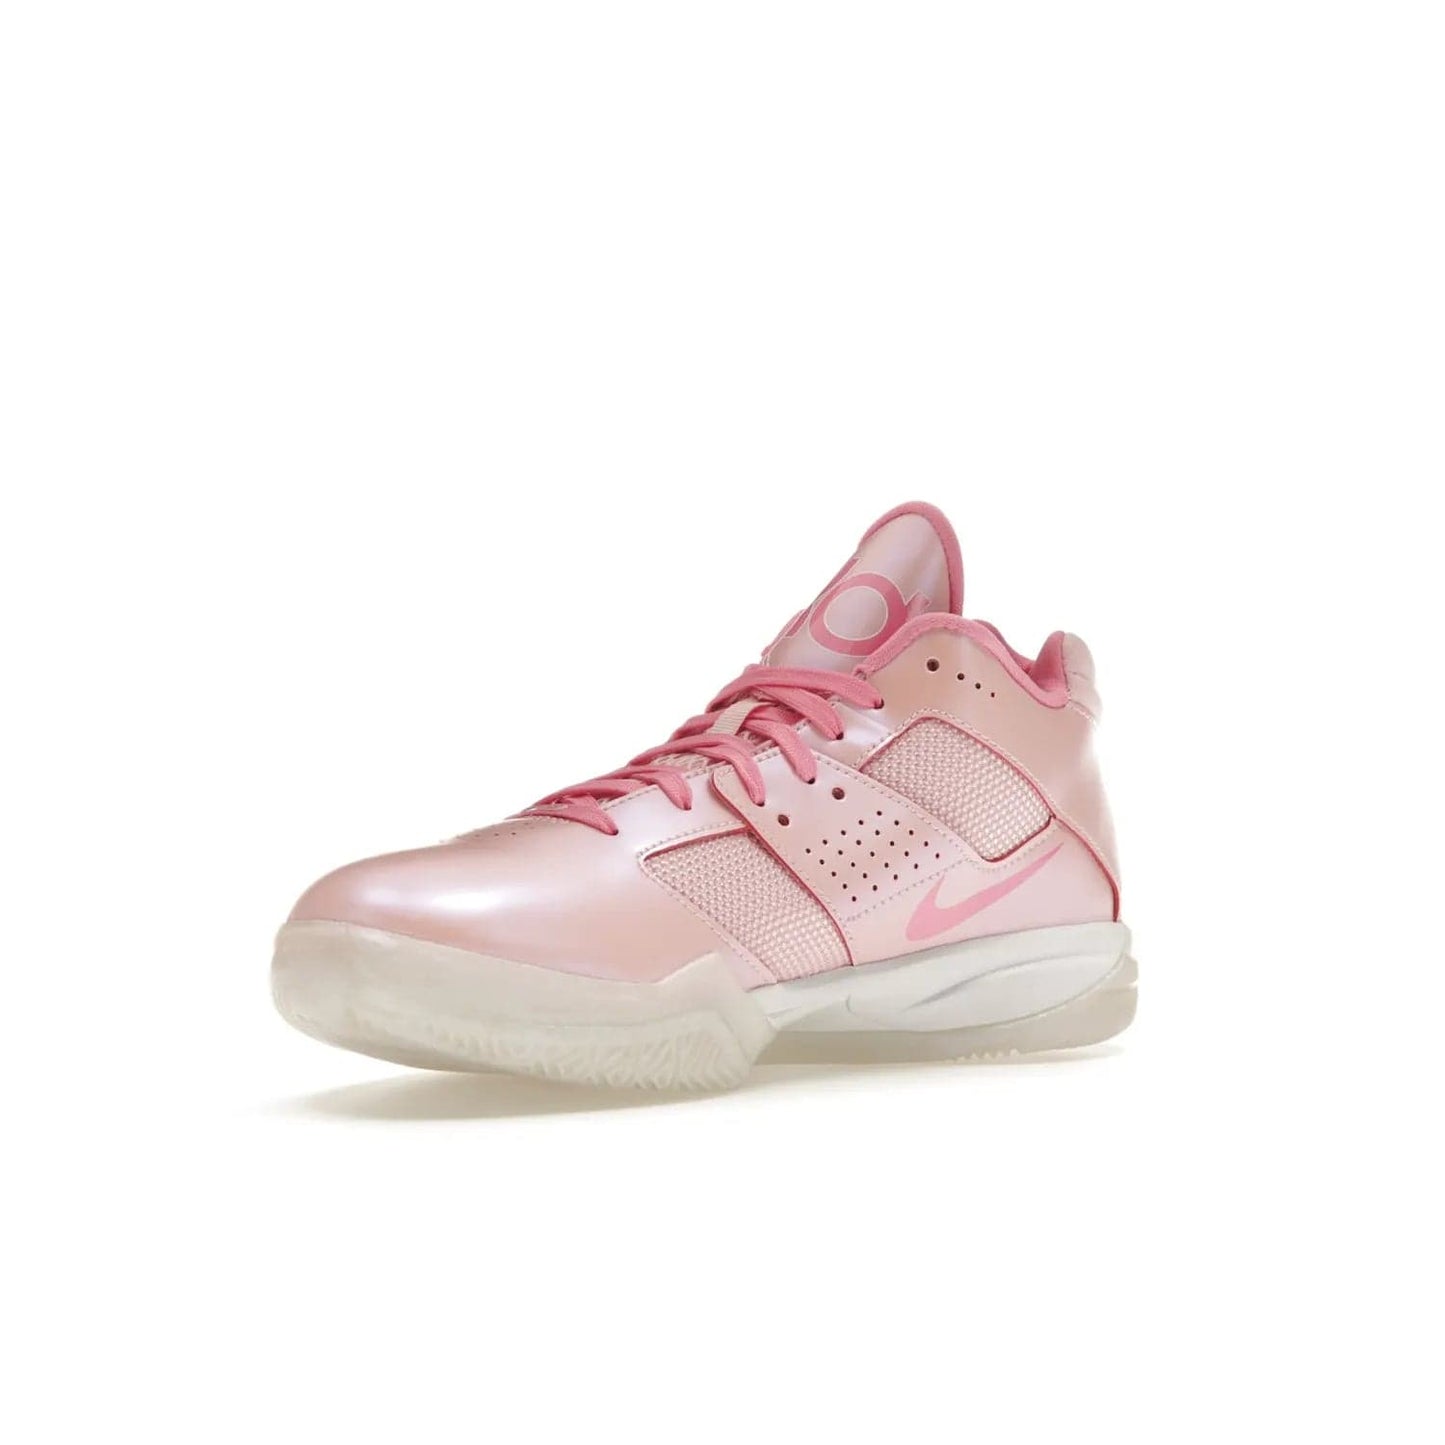 Nike KD 3 Aunt Pearl - Image 15 - Only at www.BallersClubKickz.com - Introducing the Nike KD 3 Aunt Pearl. Featuring a bold Medium Soft Pink, White, & Lotus Pink colorway. Get ready to stand out this October 15th.